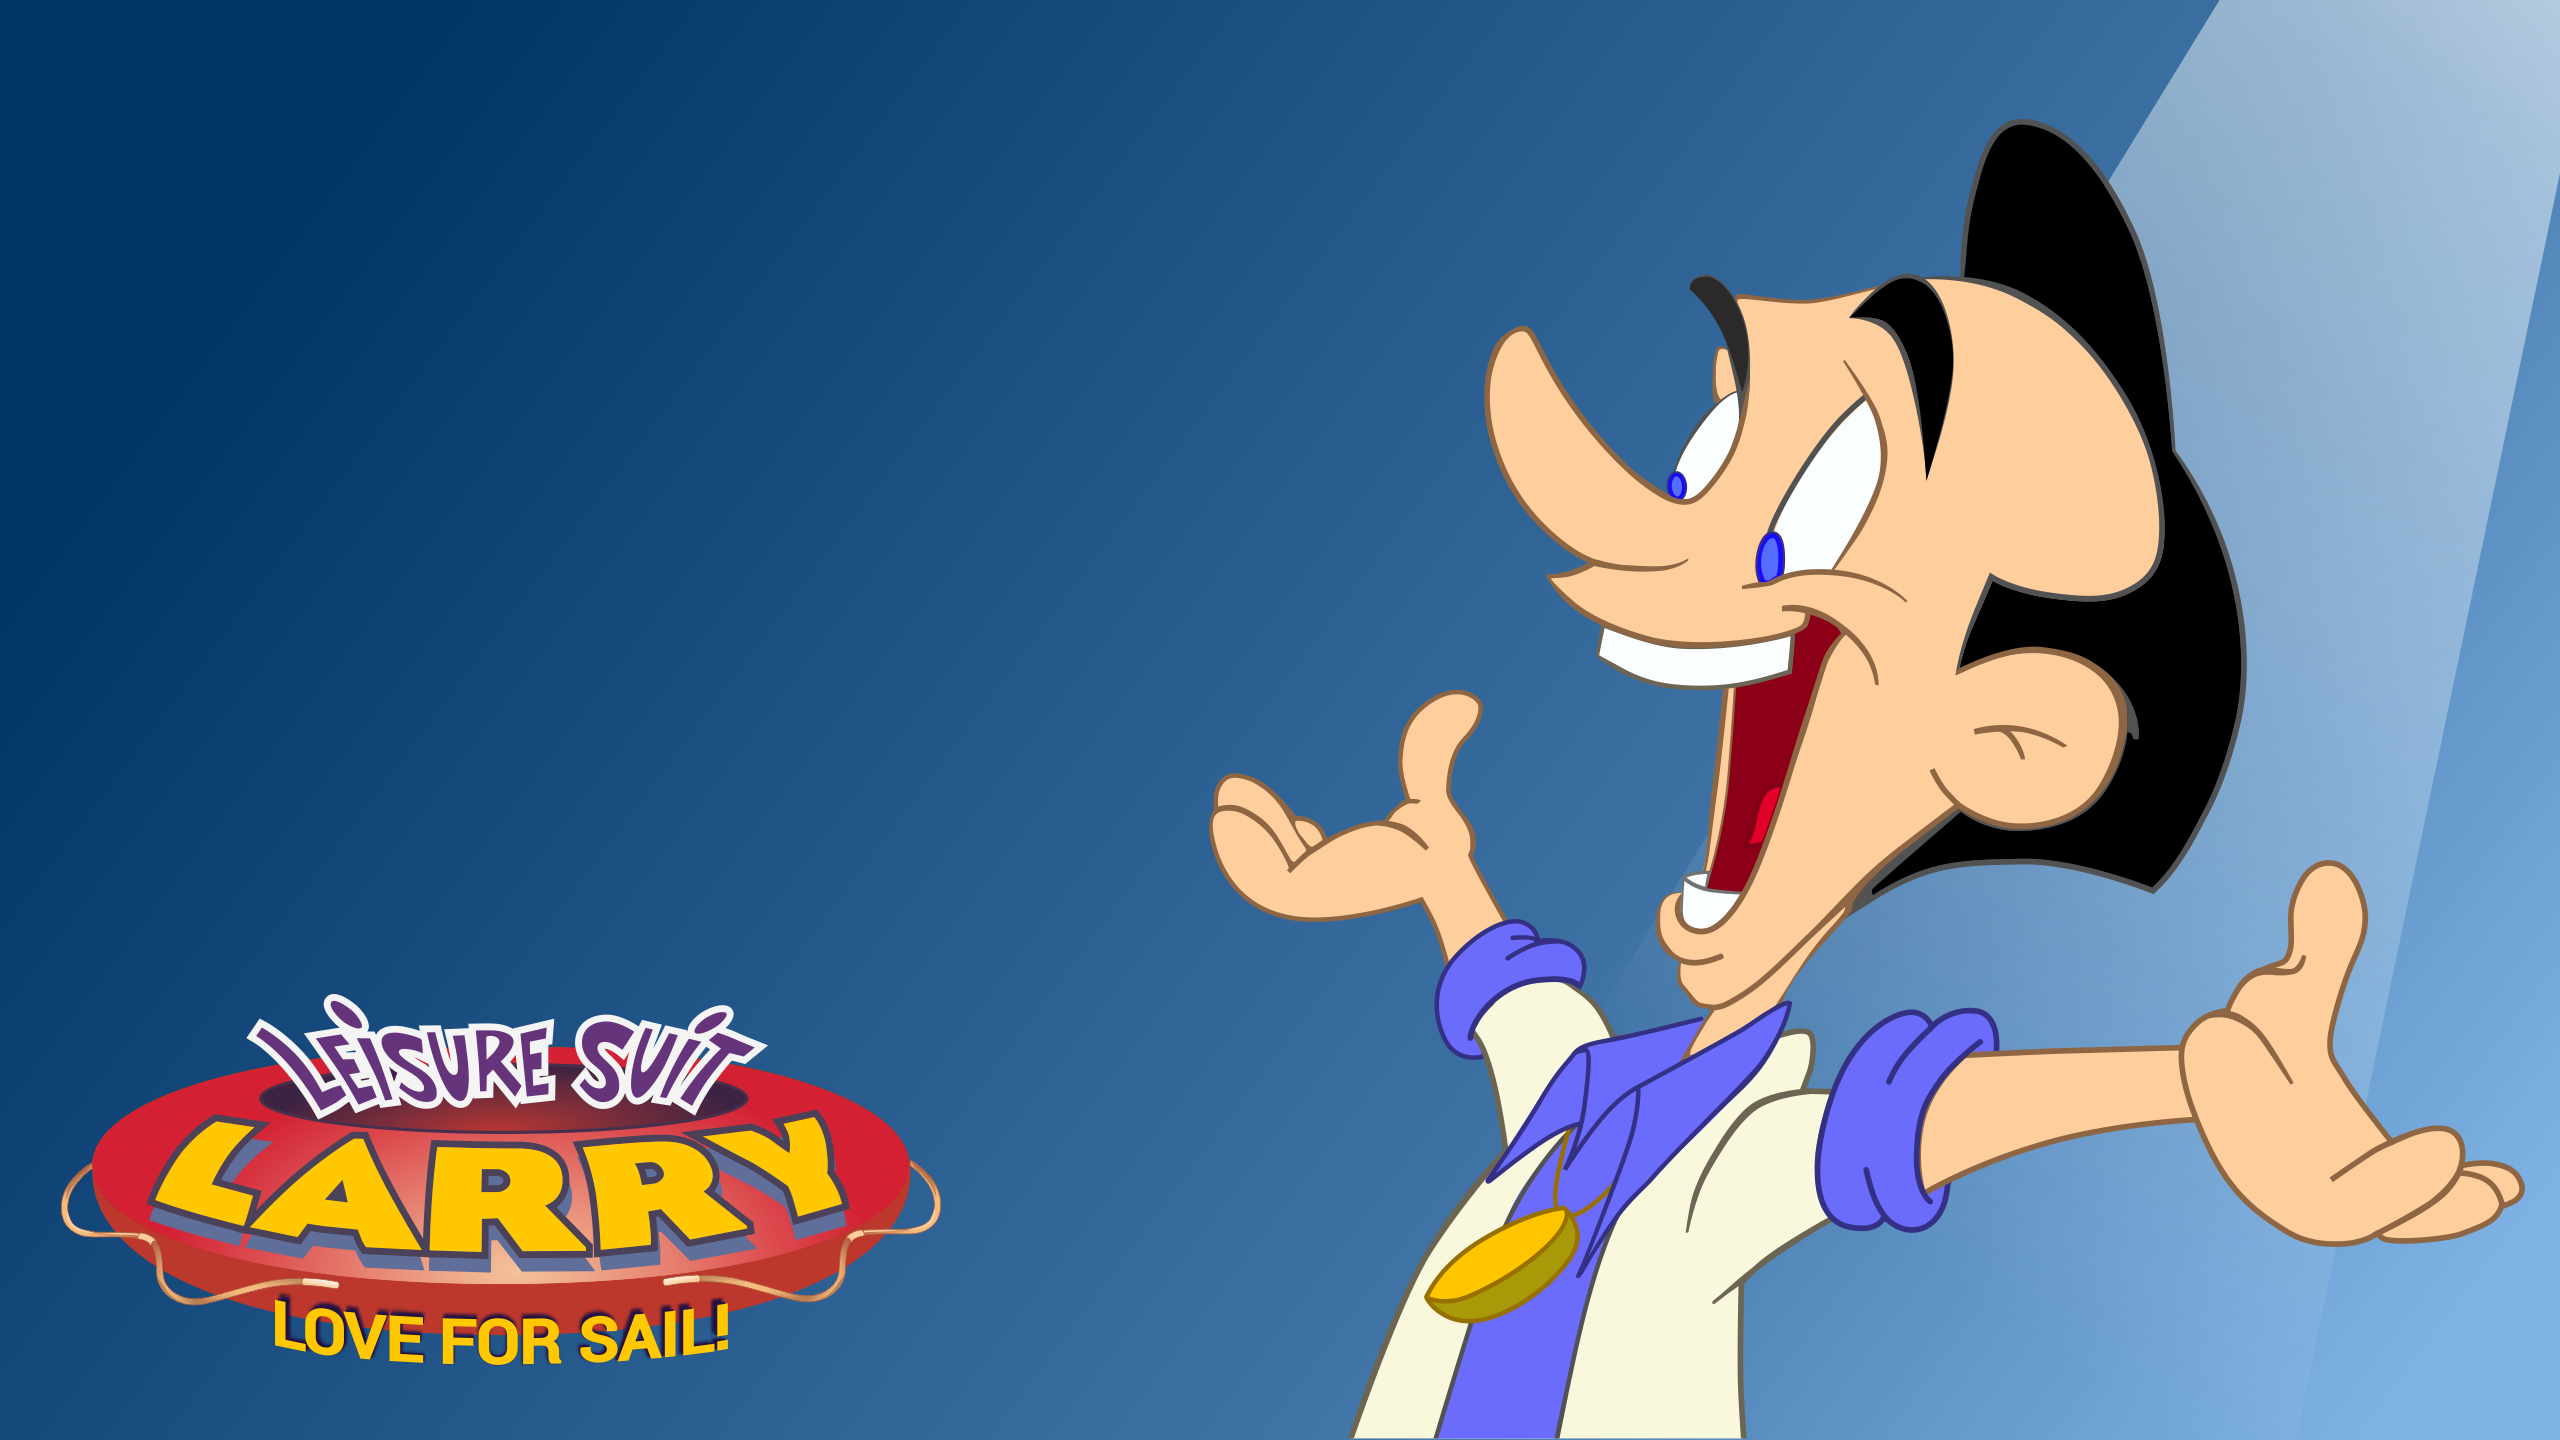 General 2560x1440 Leisure Suit Larry: Love for Sail!  Larry 7 FoxyRiot Leisure Suit Larry 7 old games Leisure Suit Larry video games